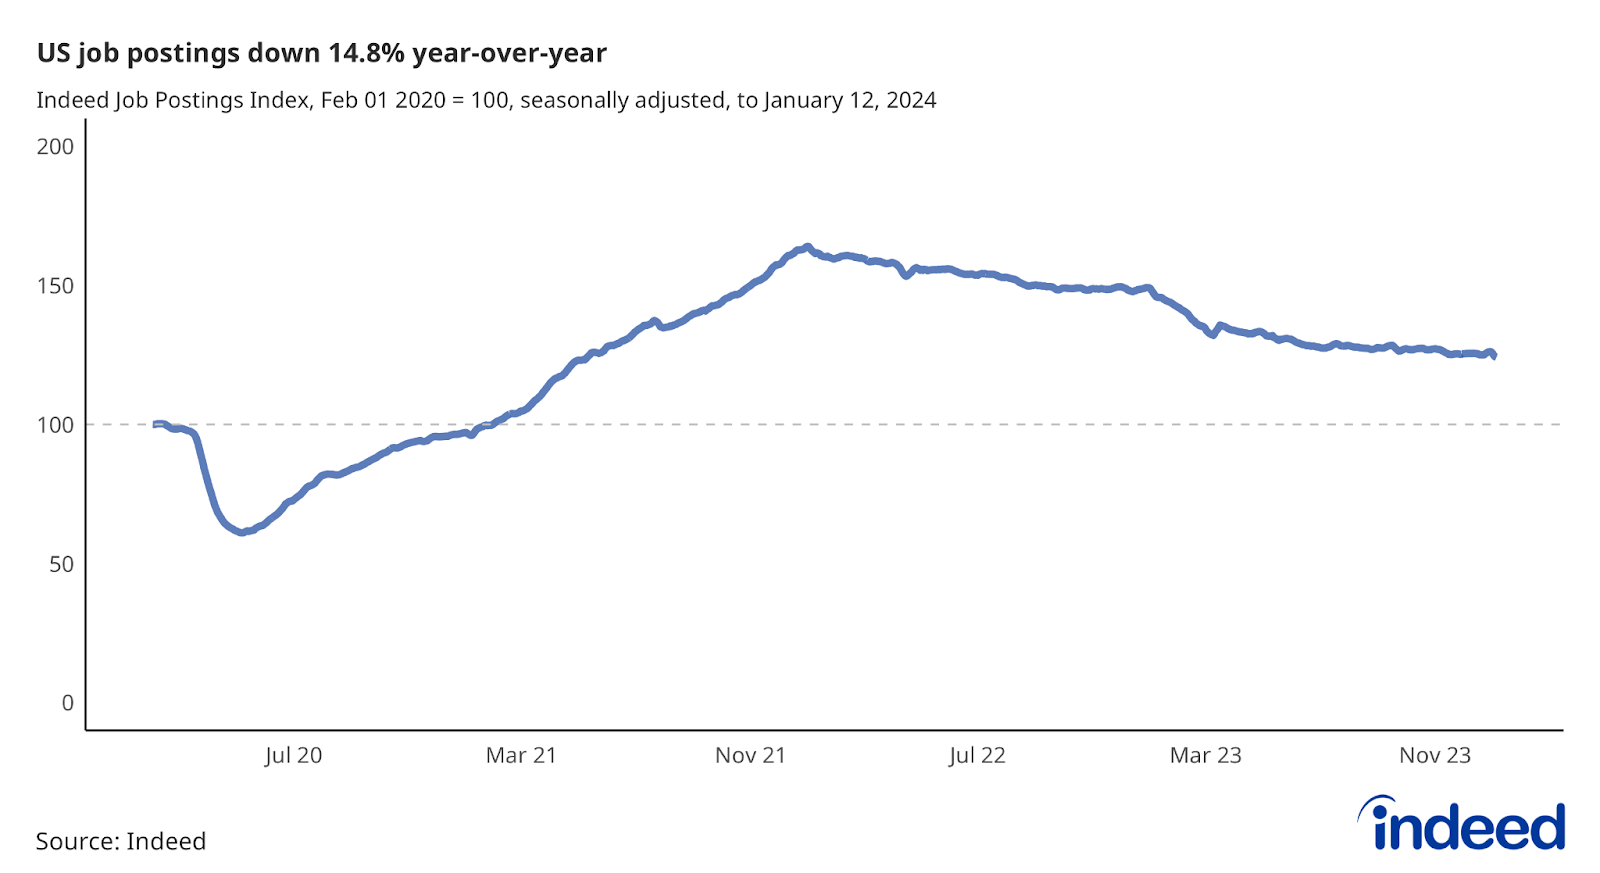 Line graph titled “US job postings down 14.8% year-over-year,” shows the increase of Indeed job postings from their pre-pandemic baseline. US job postings have fallen 14.8% since Jan. 12, 2023.